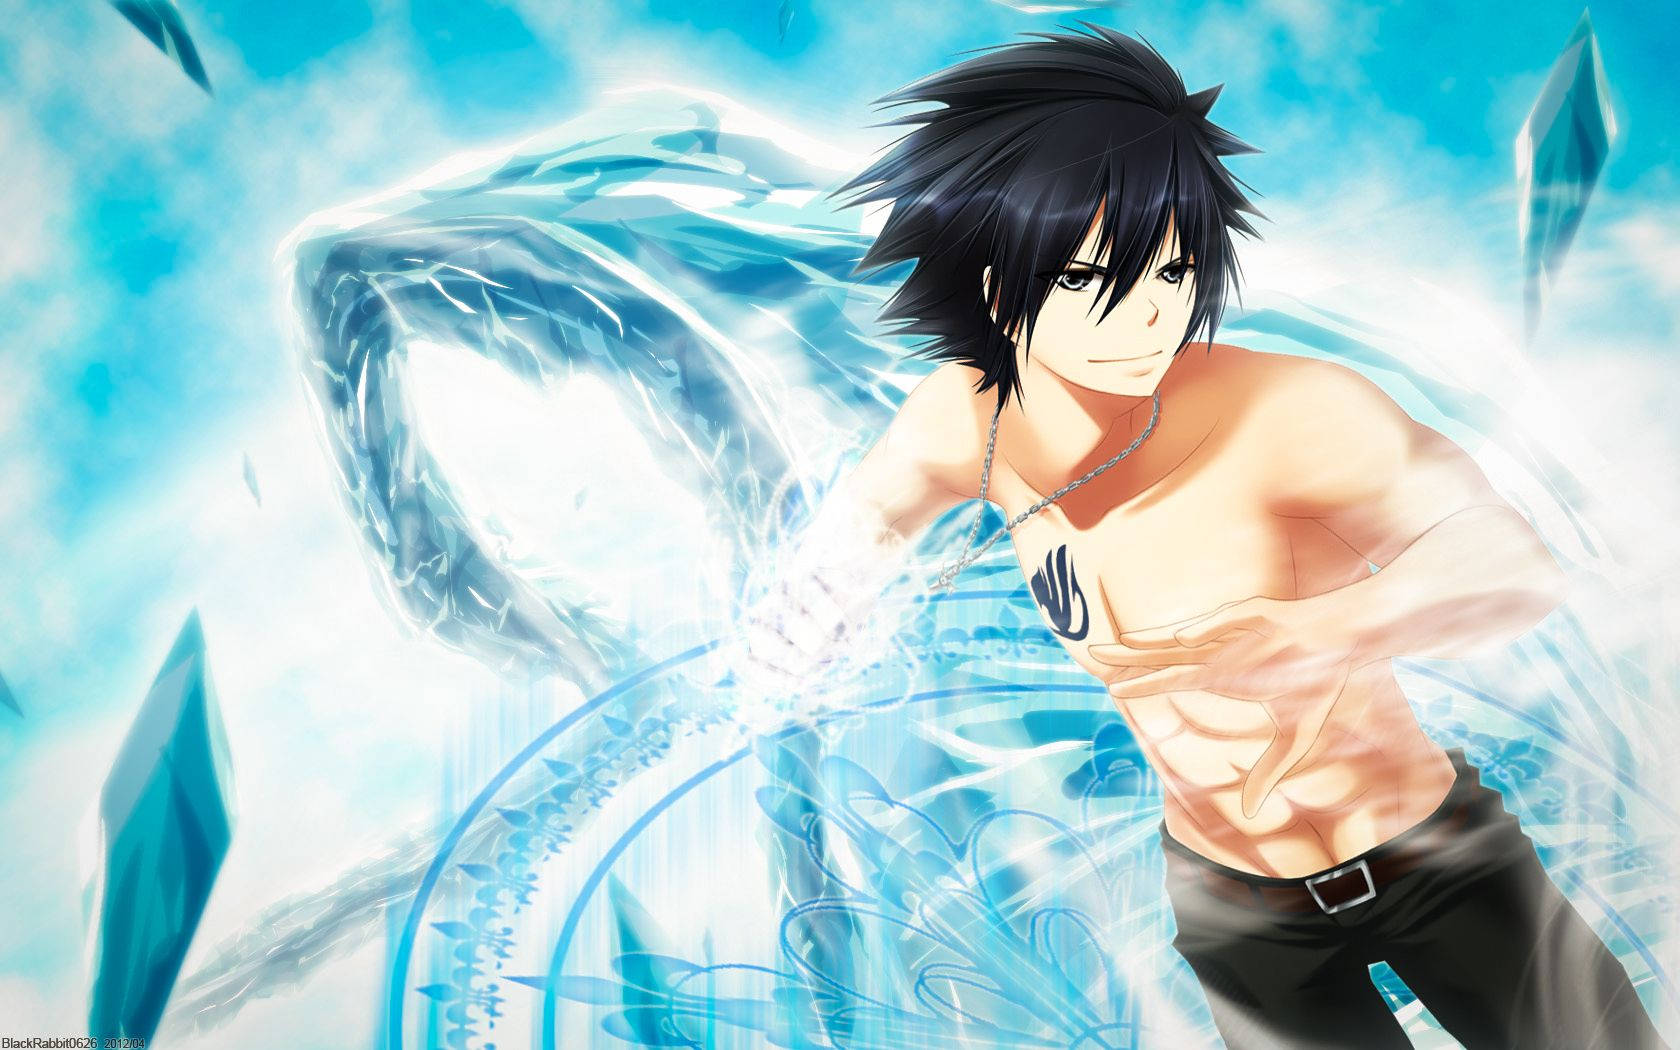 Gray Fullbuster ready to cast a spell in Fairy Tail Wallpaper